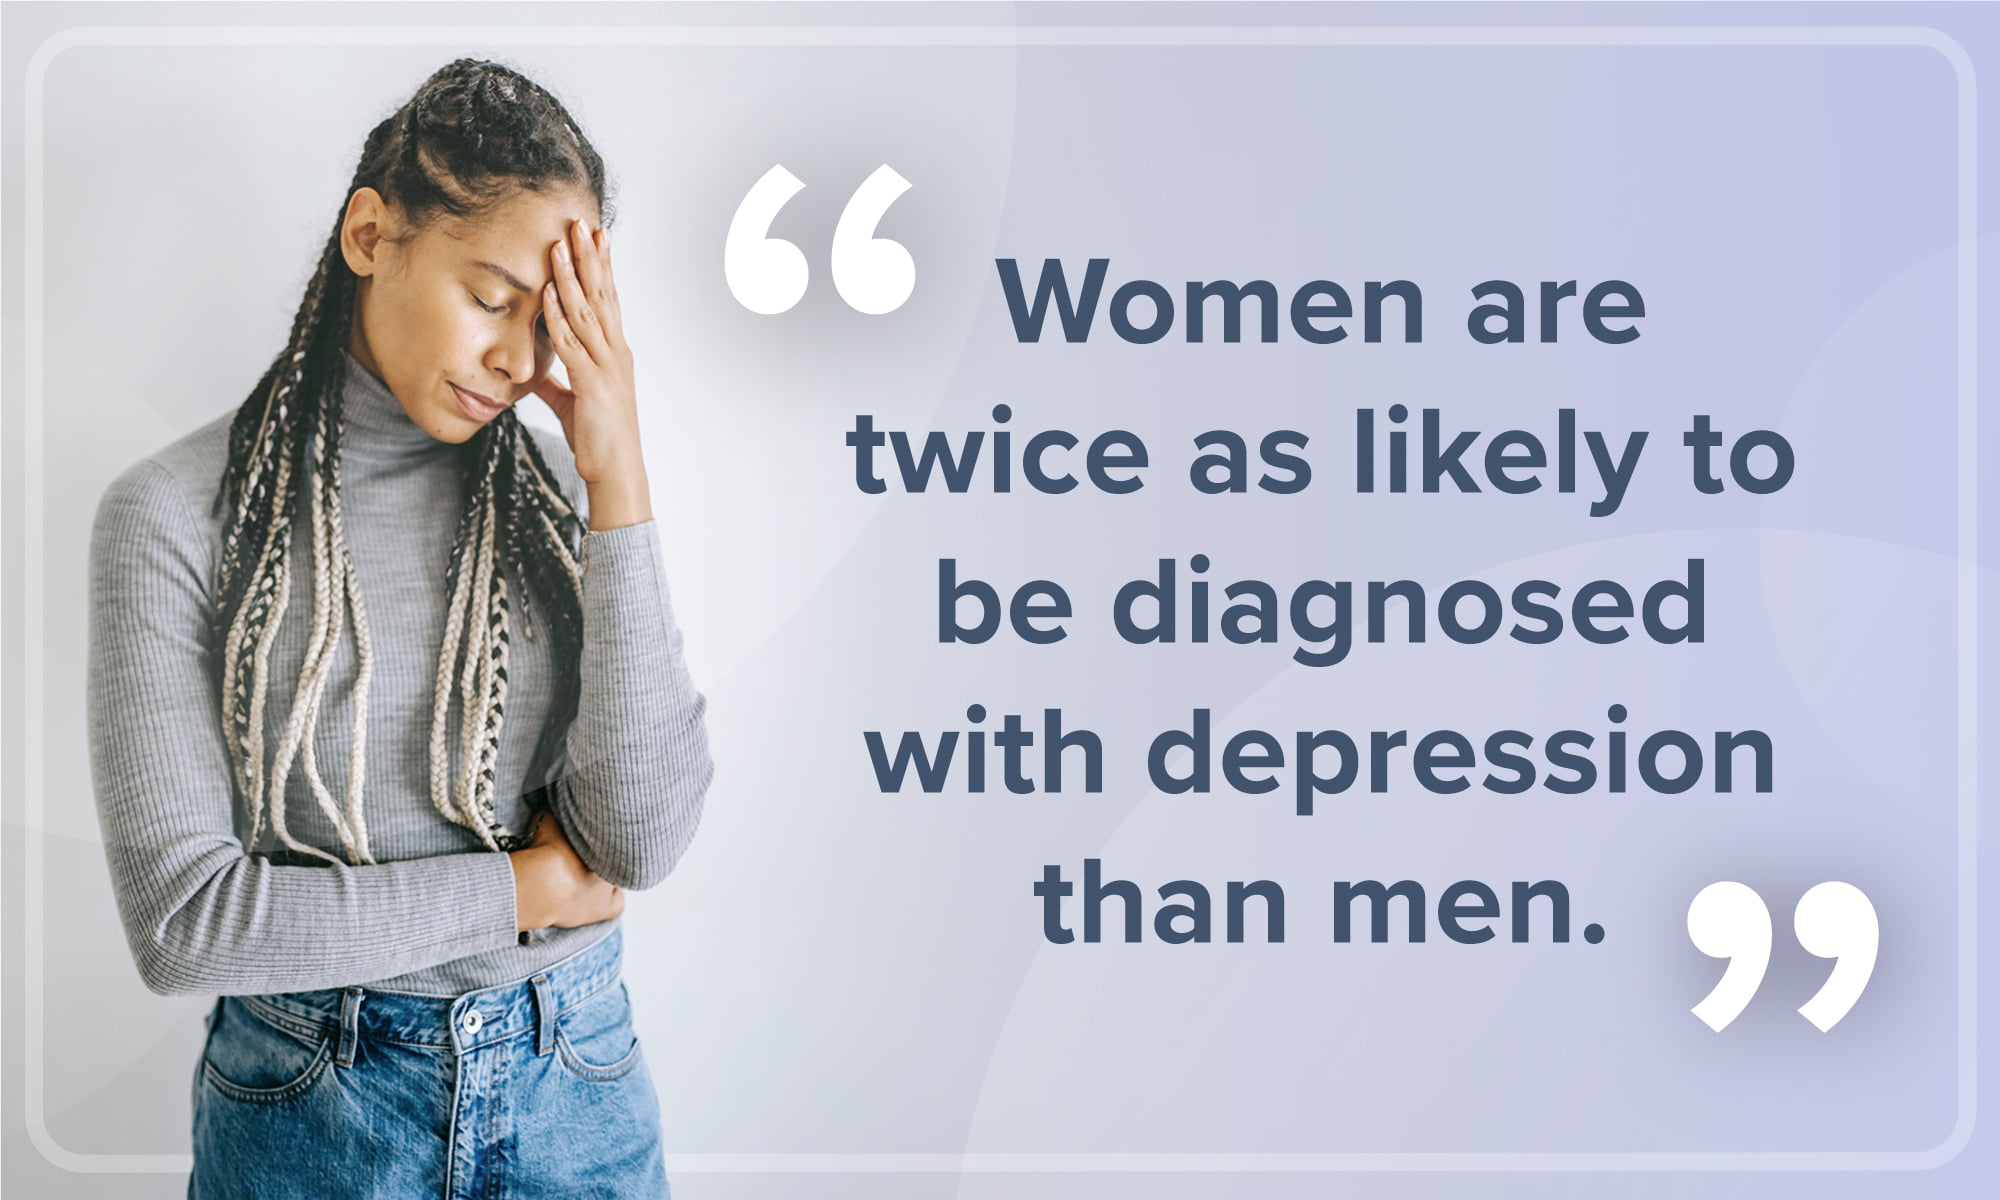 An image portraying a concerned woman bringing her hand to her face, accompanied by the quote: "Women are twice as likely to be diagnosed with depression than men."